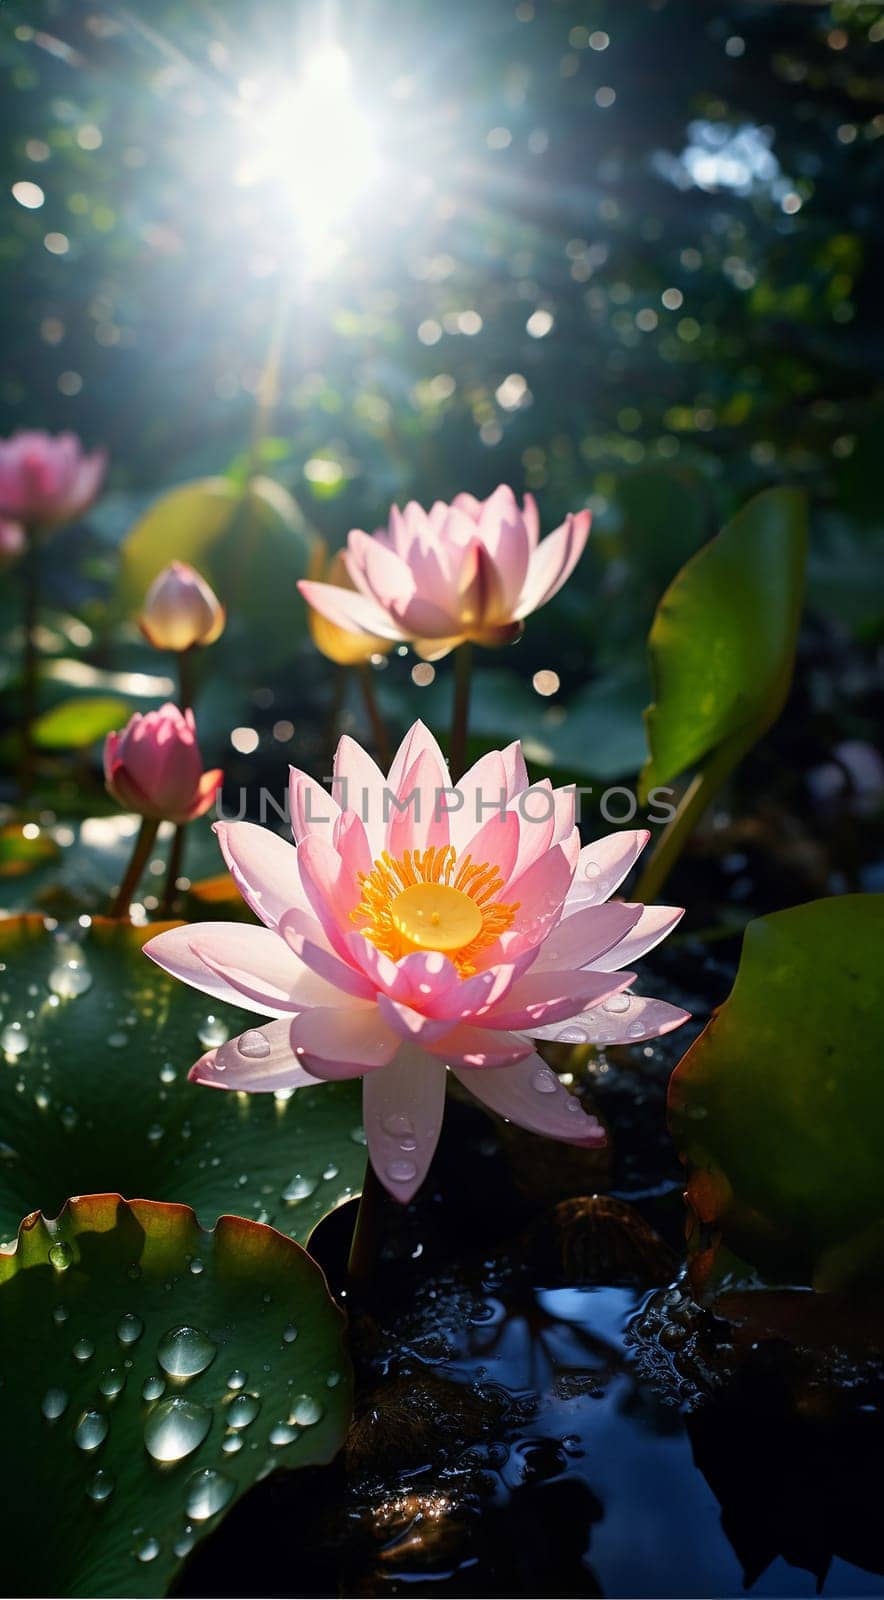 Magical pink water lily by night, lotus flower Orange Sunset in the garden pond. Close-up of Nymphaea reflected in water. Flower landscape for nature wallpaper. Vertical background copy space. Sparkling bokeh lights. Lotus flower magic by Annebel146